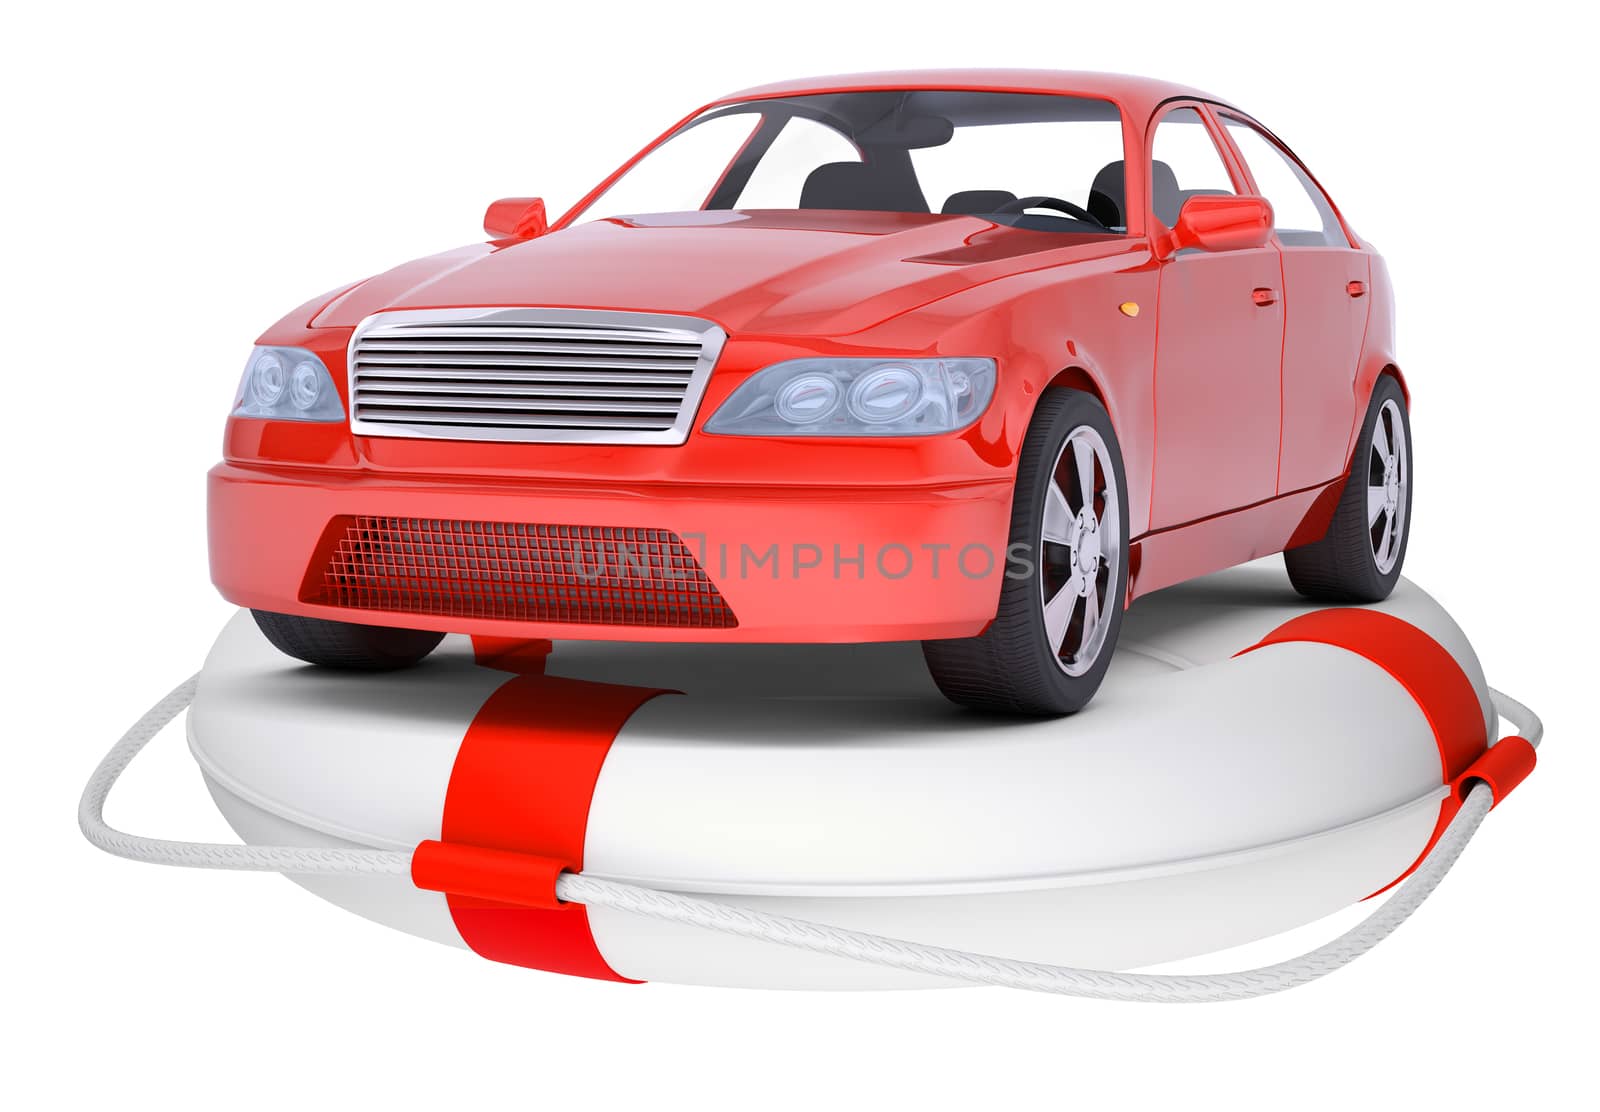 Red car on ring buoy on isolated white background